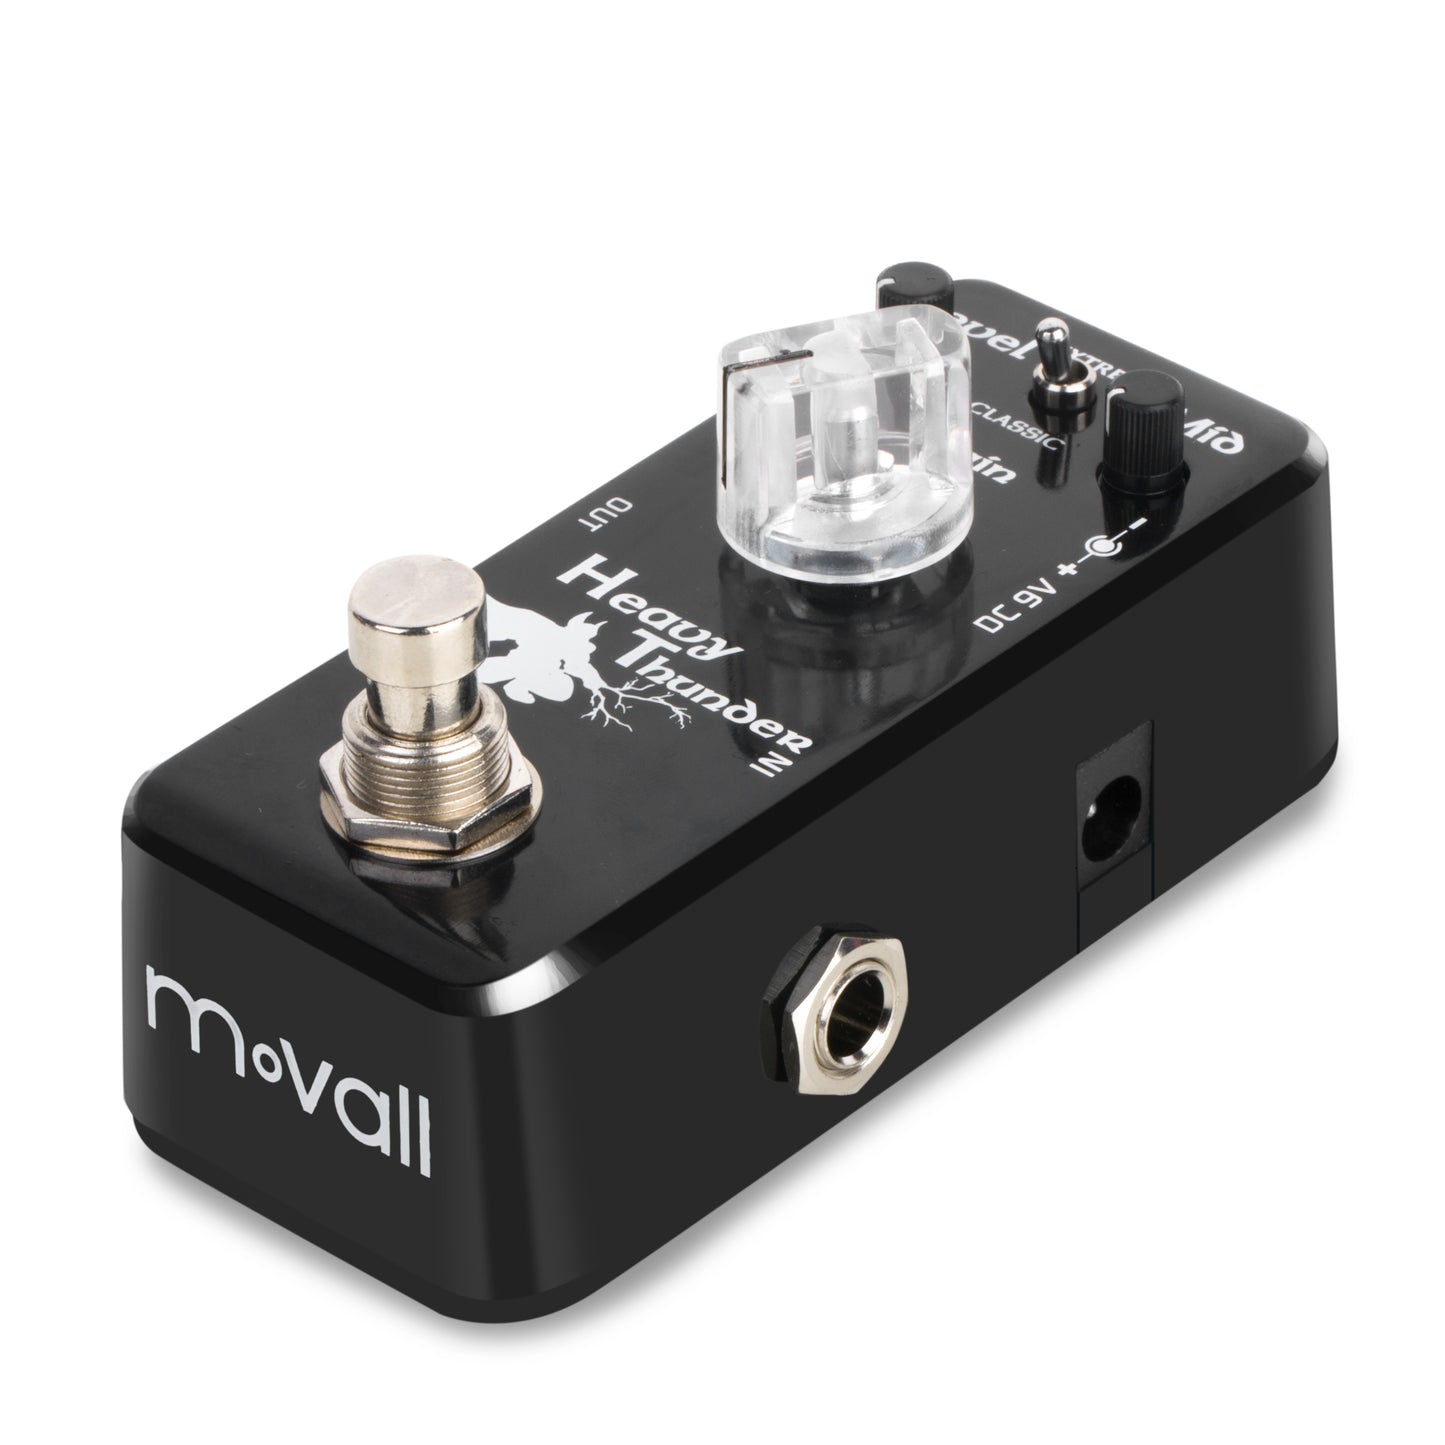 Movall MP-321 Heavy Thunder Mini Distortion Pedal